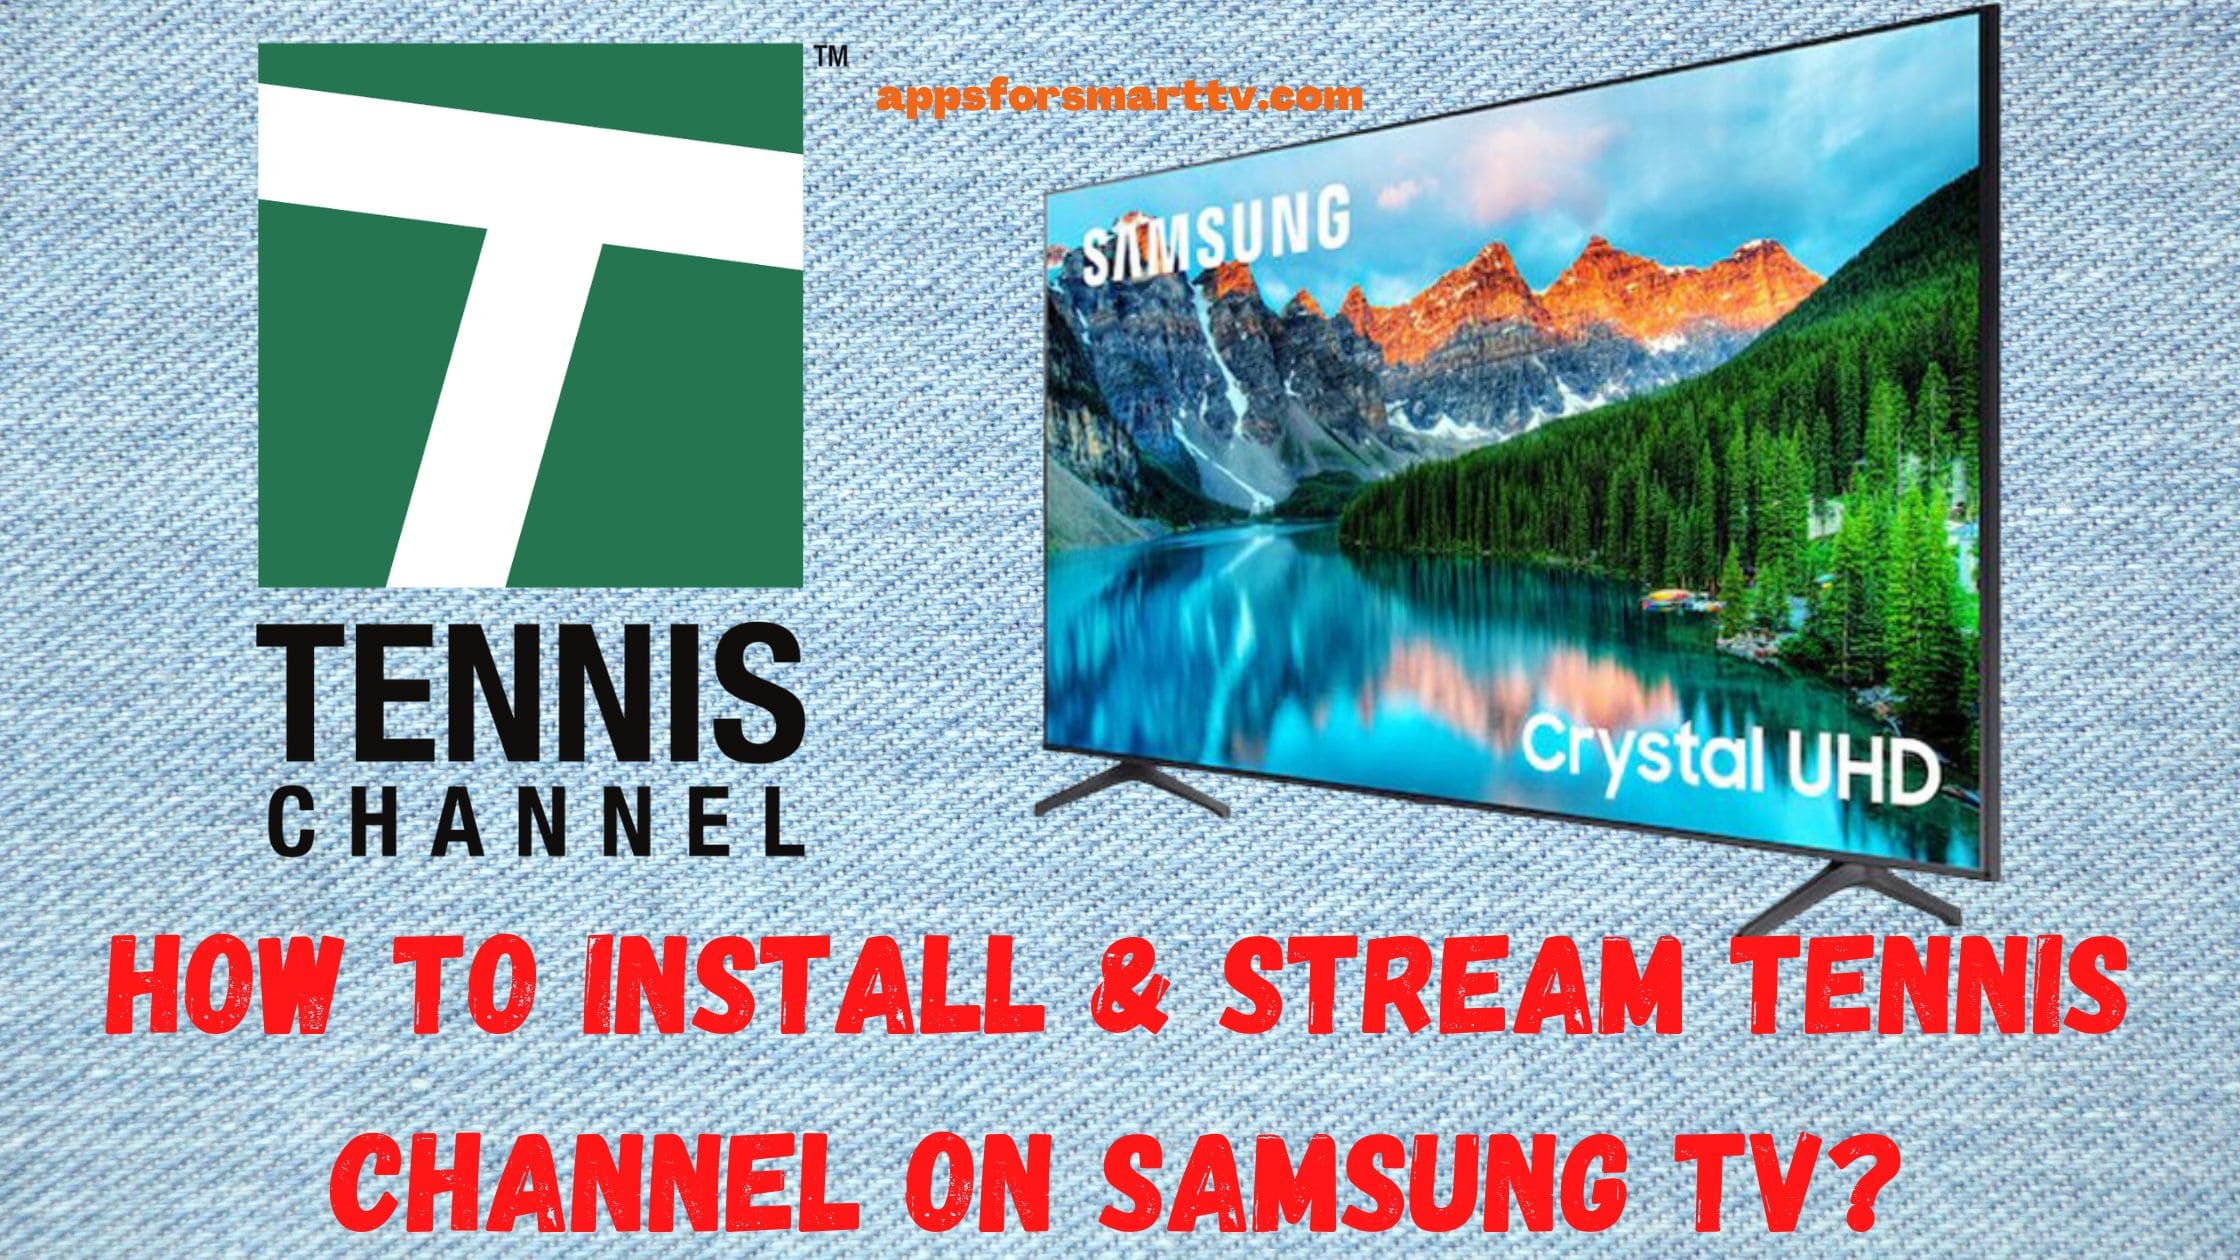 How to Install & Stream Tennis Channel on Samsung TV?